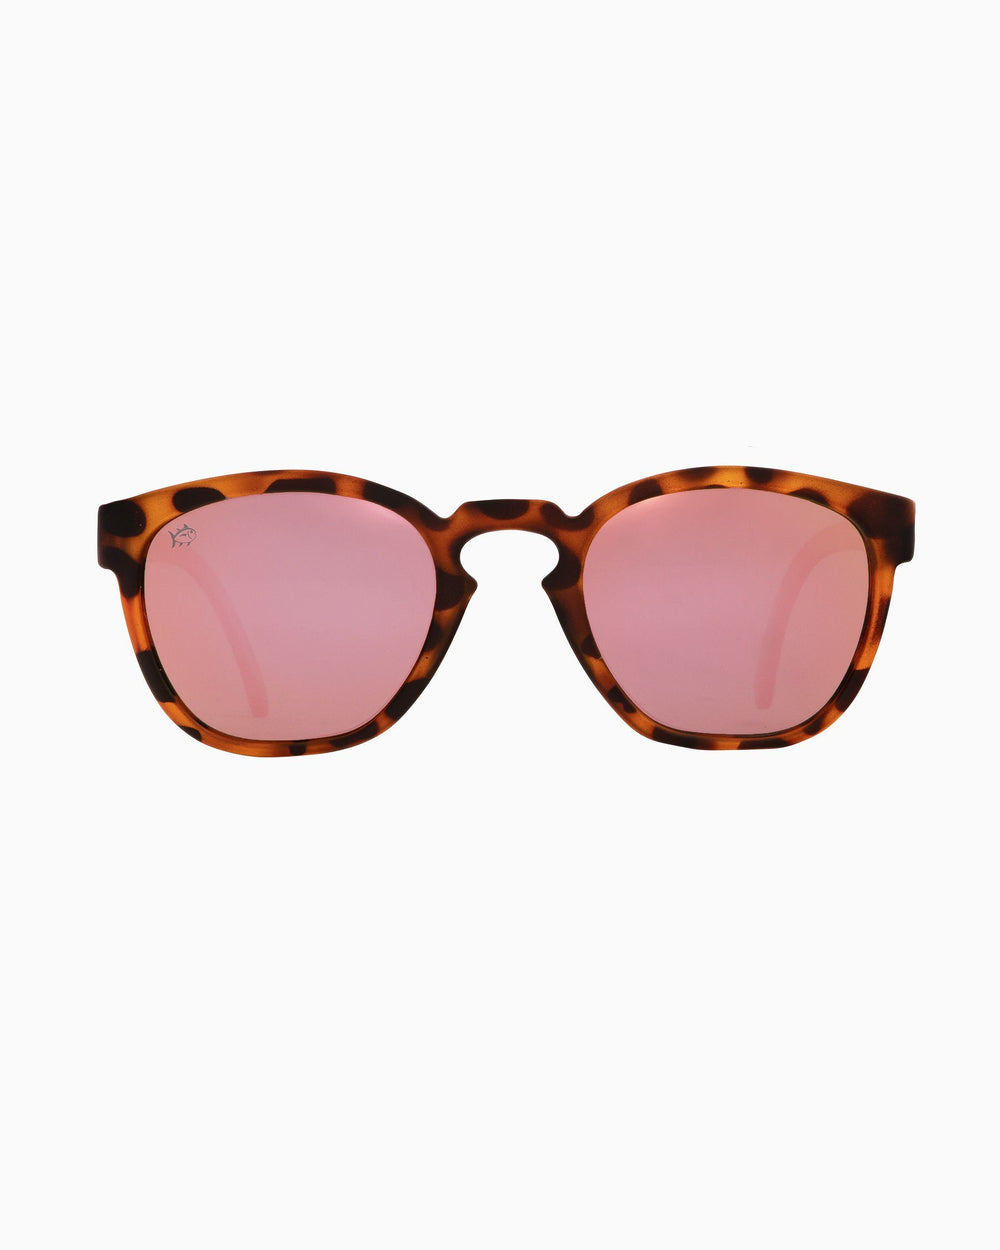 The front of the Rheos Seabrooks Sunglasses by Southern Tide - Tortoise Rose